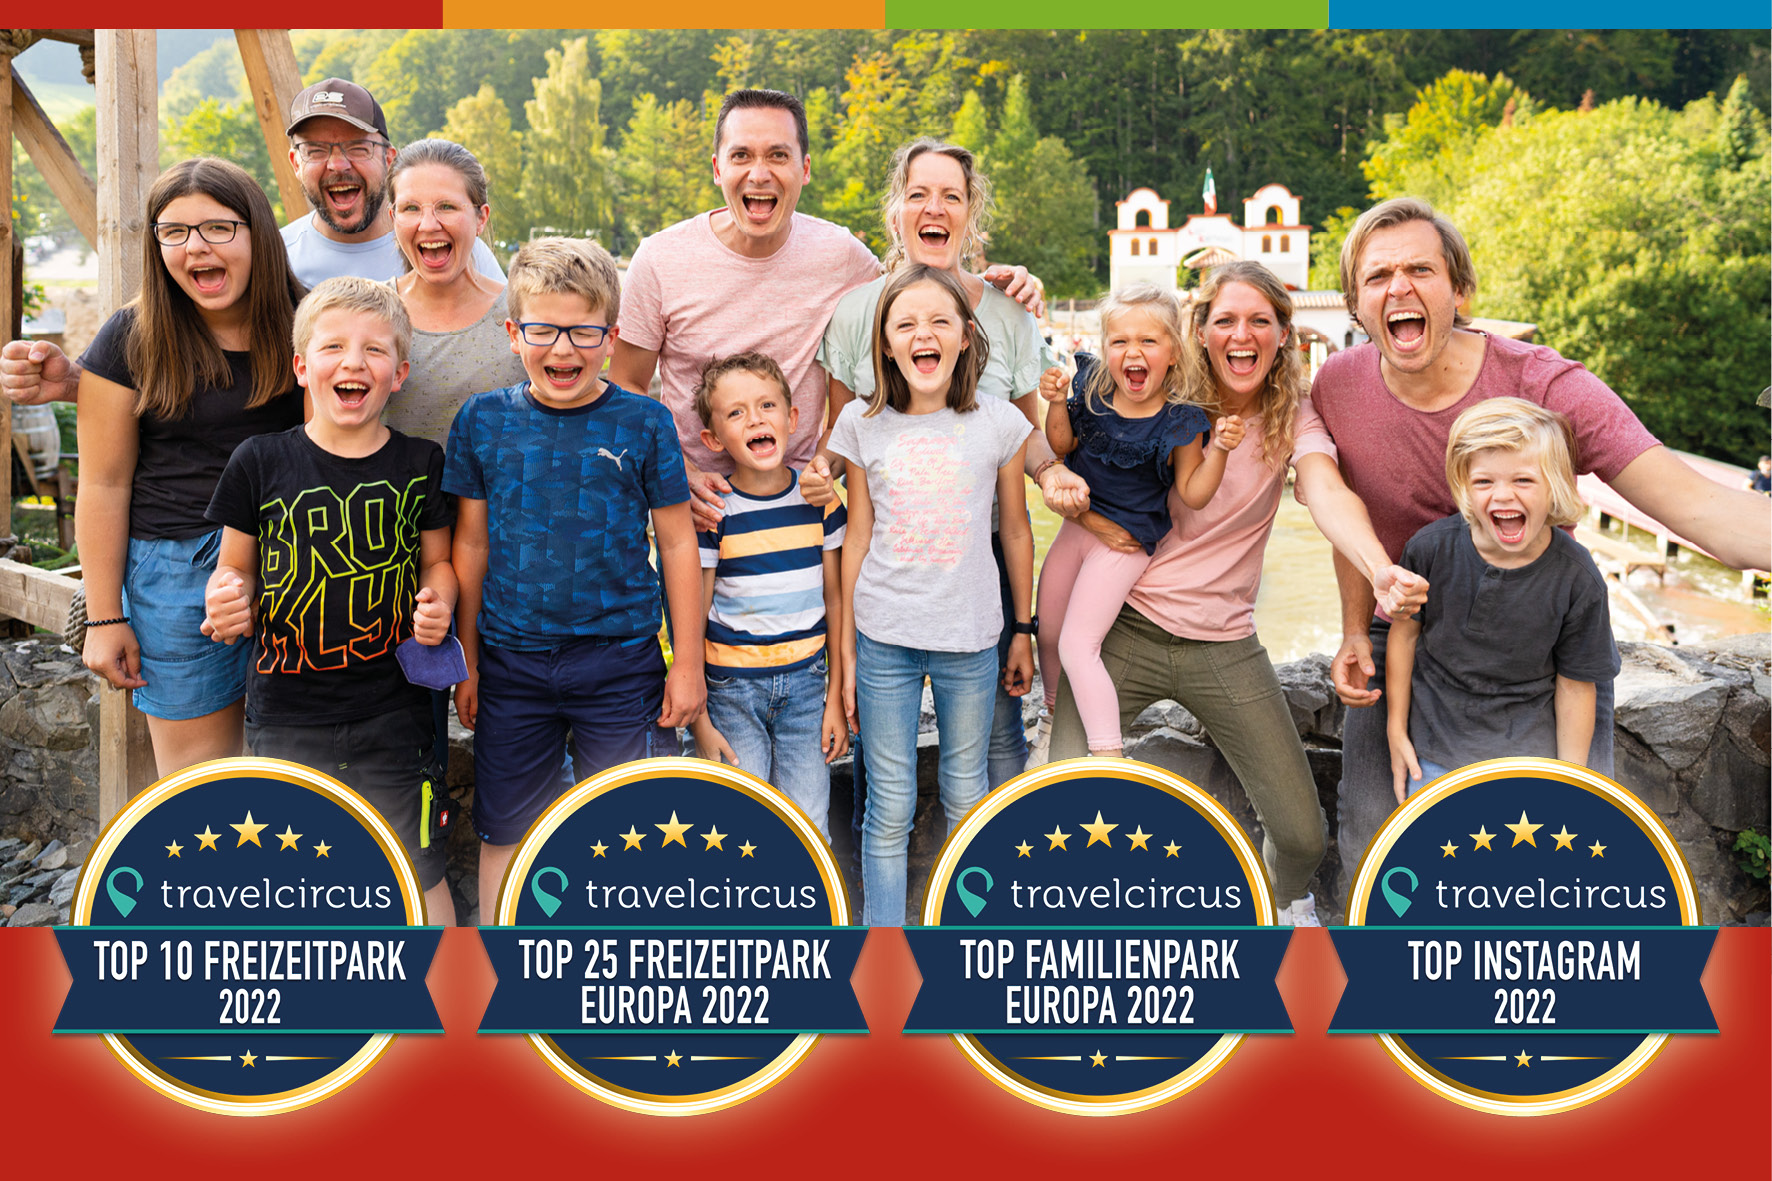 You are currently viewing Fort Fun unter den TOP 25 Freizeitparks in Europa